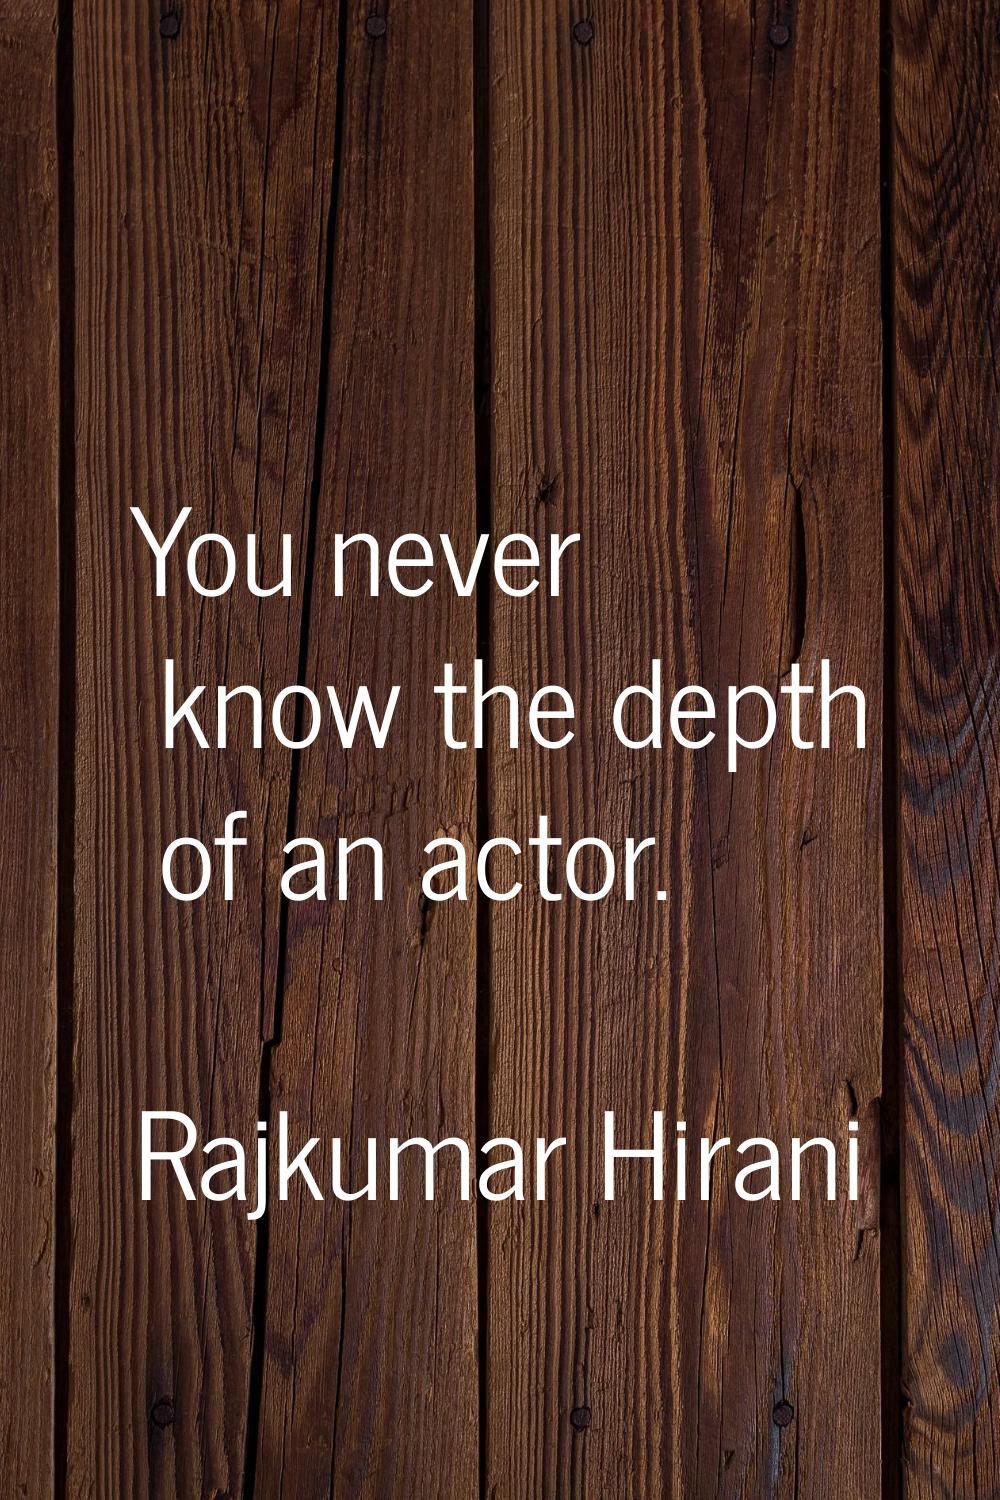 You never know the depth of an actor.